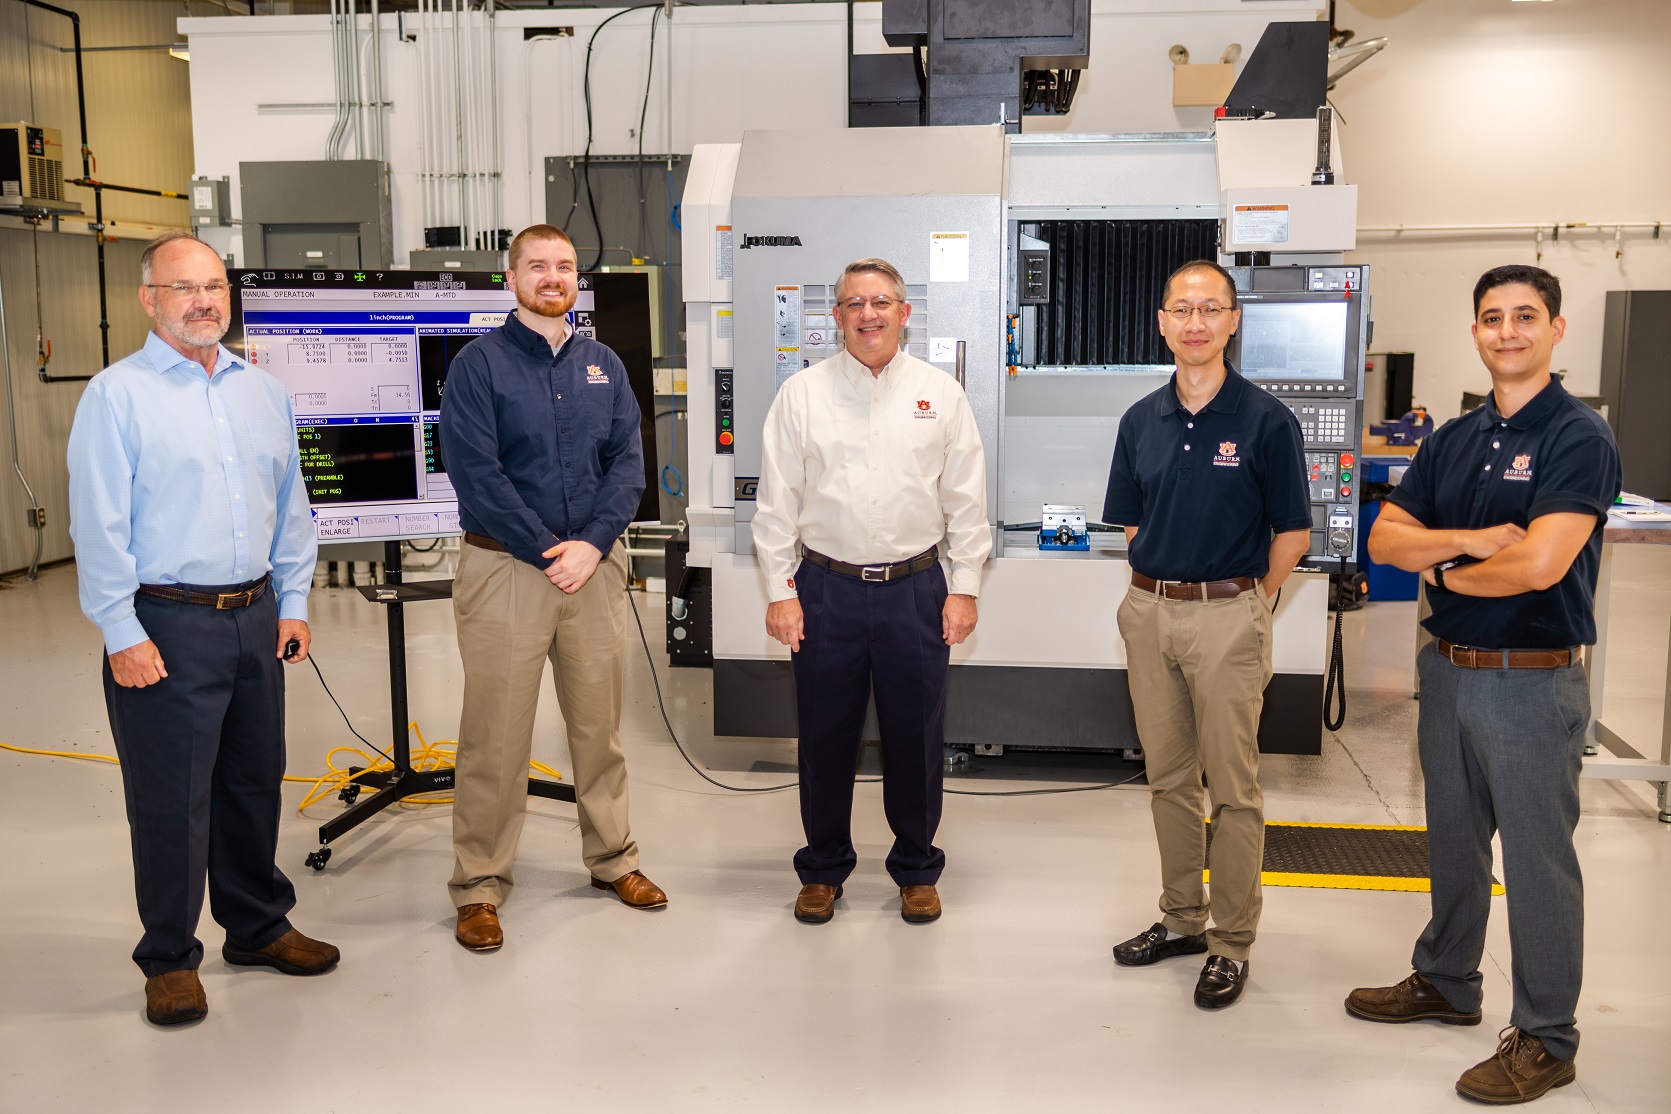 The Interdisciplinary Center for Advanced Manufacturing, or ICAMS, at Auburn University, housed within the Department of InLewis Payton; Greg Purdy; Greg Harris; Peter Liu; and Konstantinos Mykoniatis